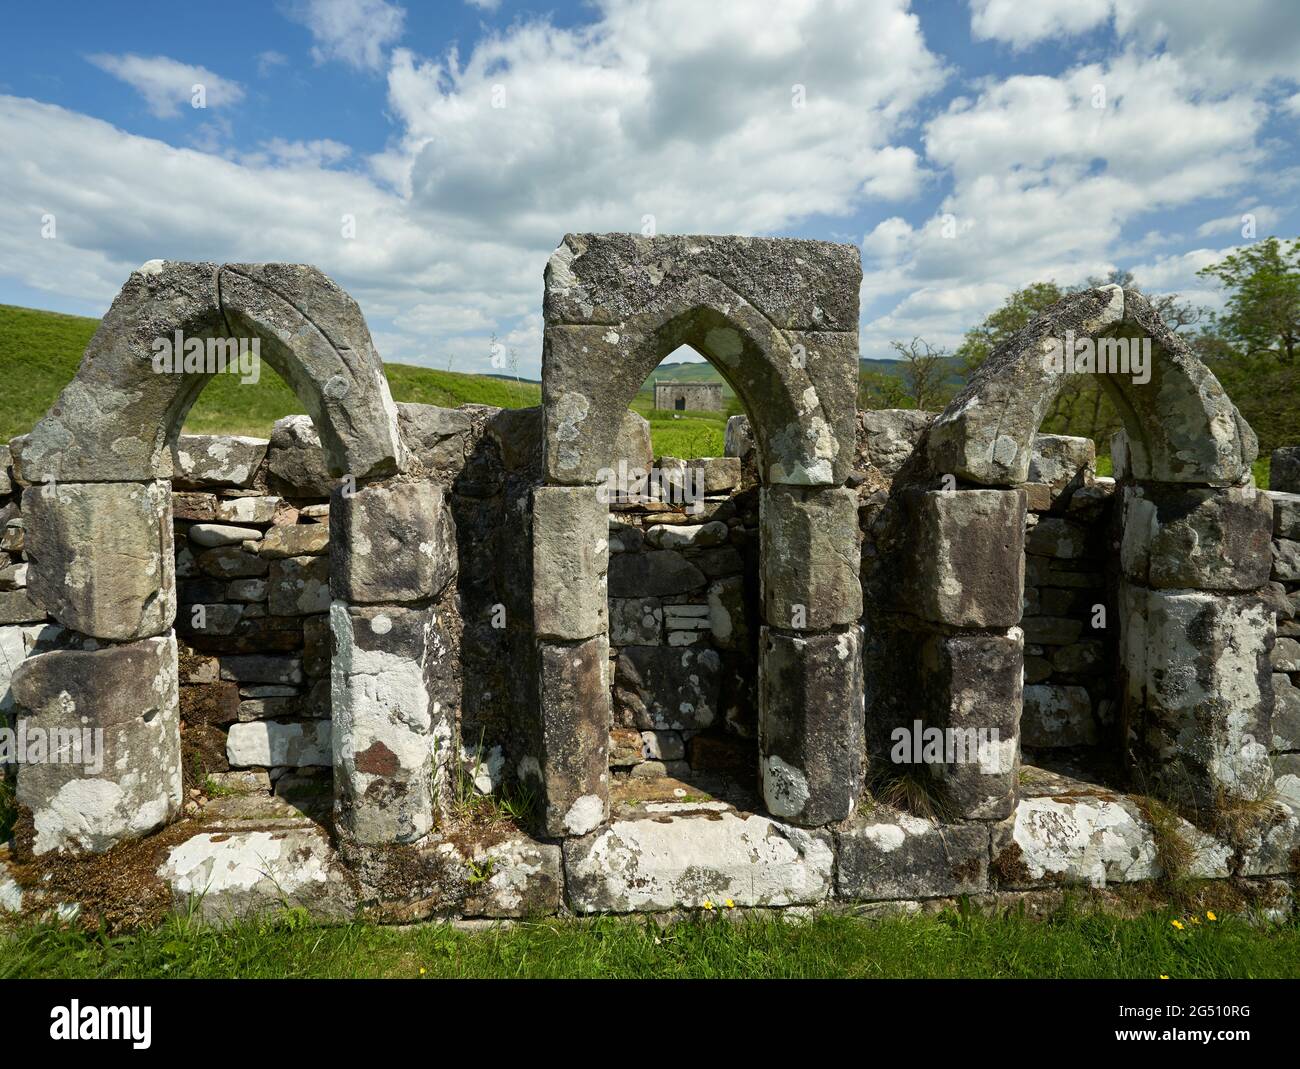 Three windows of the Chapel of Hermitage adjacent to Hermitage Castle in the Scottish Borders. Stock Photo